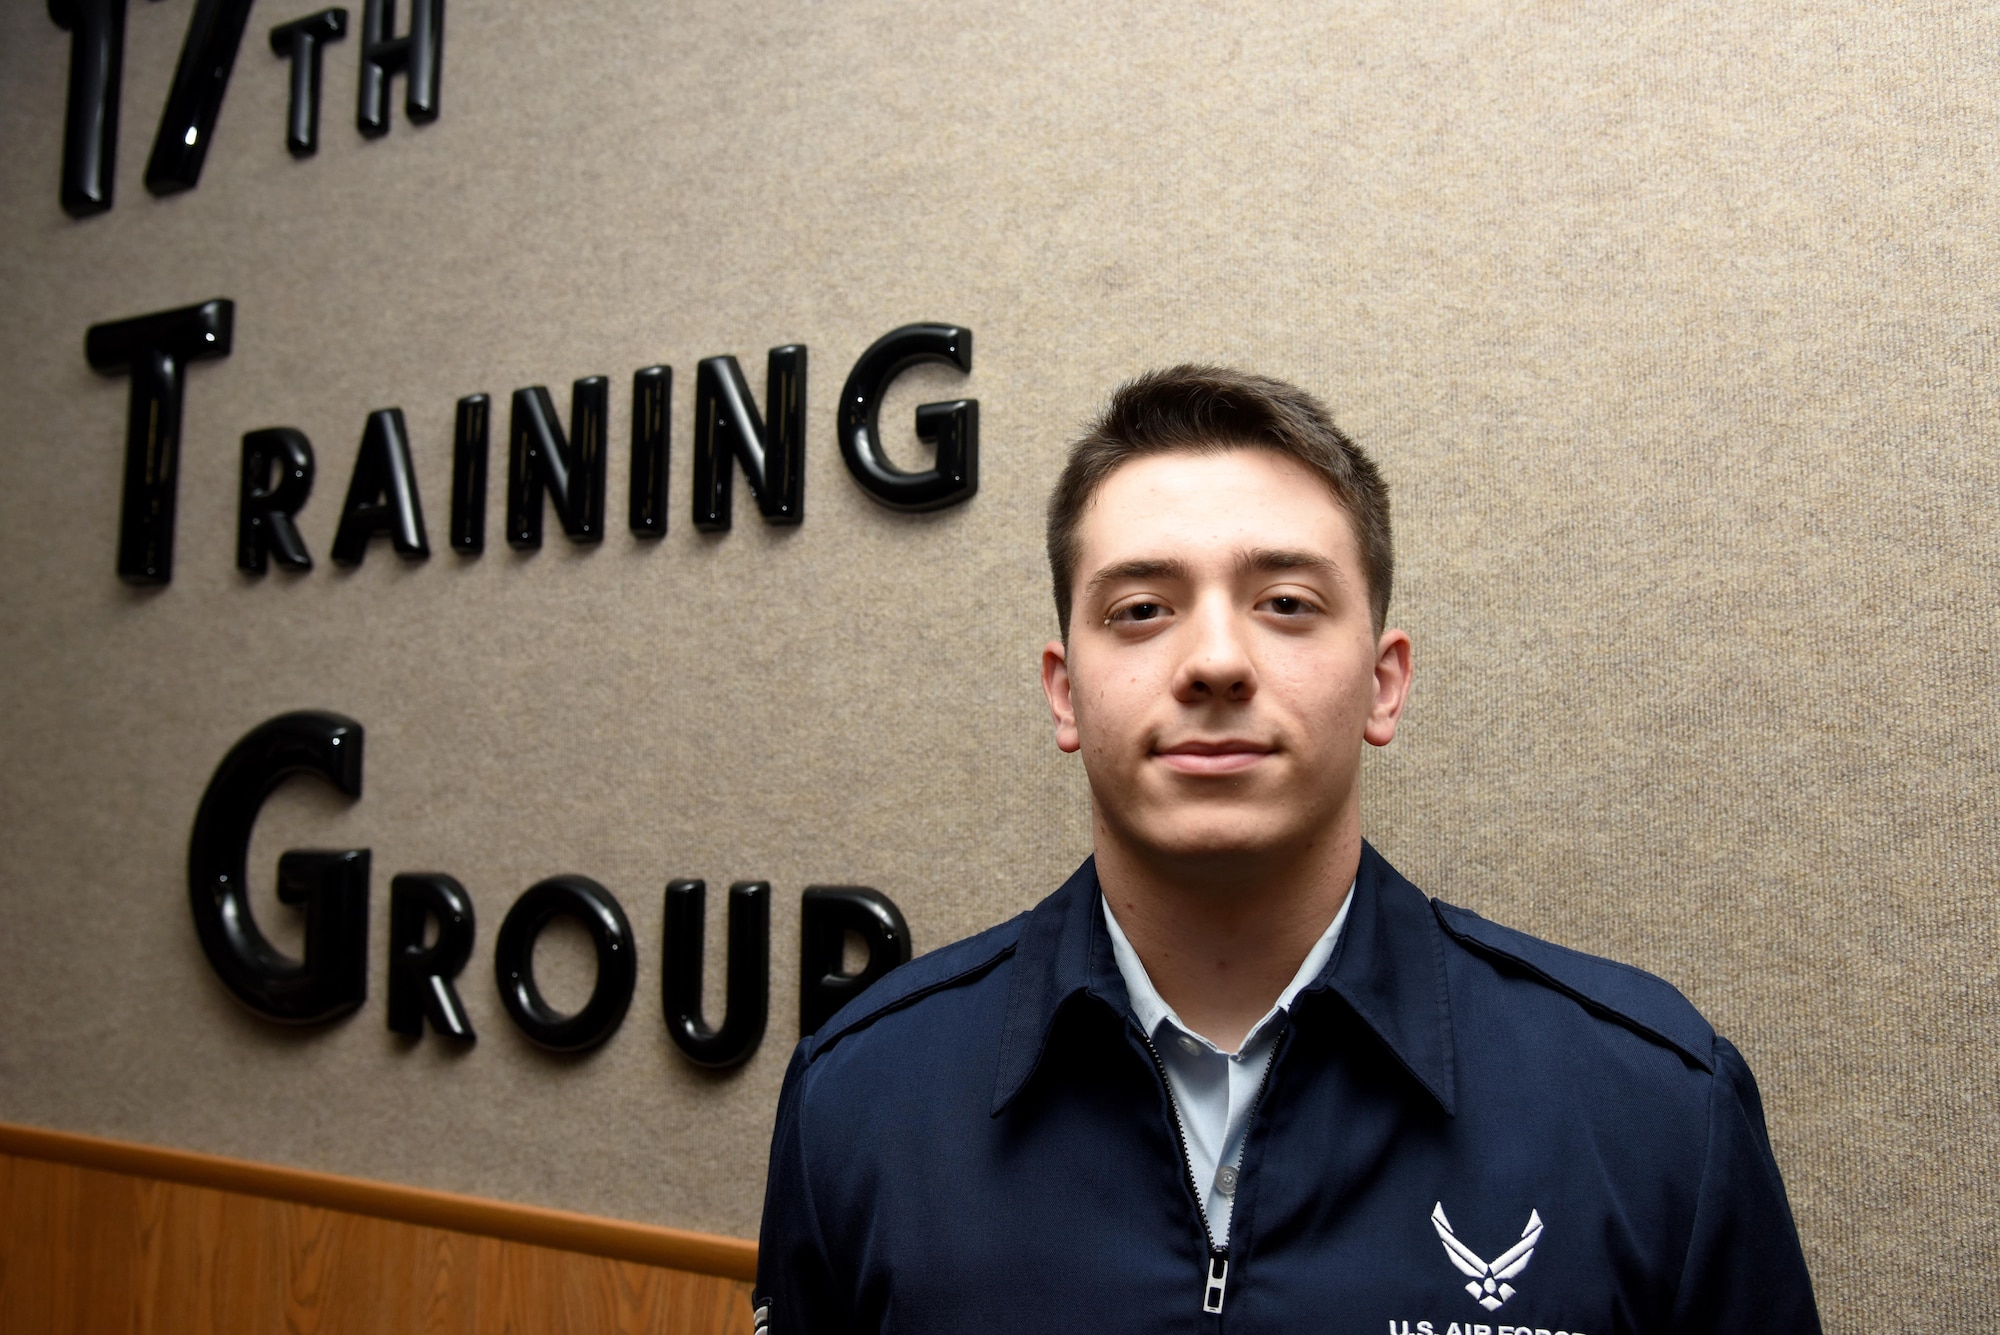 U.S. Air Force Airman 1st Class Craig Irvin, 315th Training Squadron student, smiles for a portrait at Brandenburg Hall on Goodfellow Air Force Base, Texas, Feb. 3, 2017. Irvin is the Goodfellow Student of the Month spotlight for January 2017, a series highlighting Goodfellow students. (U.S. Air Force photo by Staff Sgt. Joshua Edwards/Released)